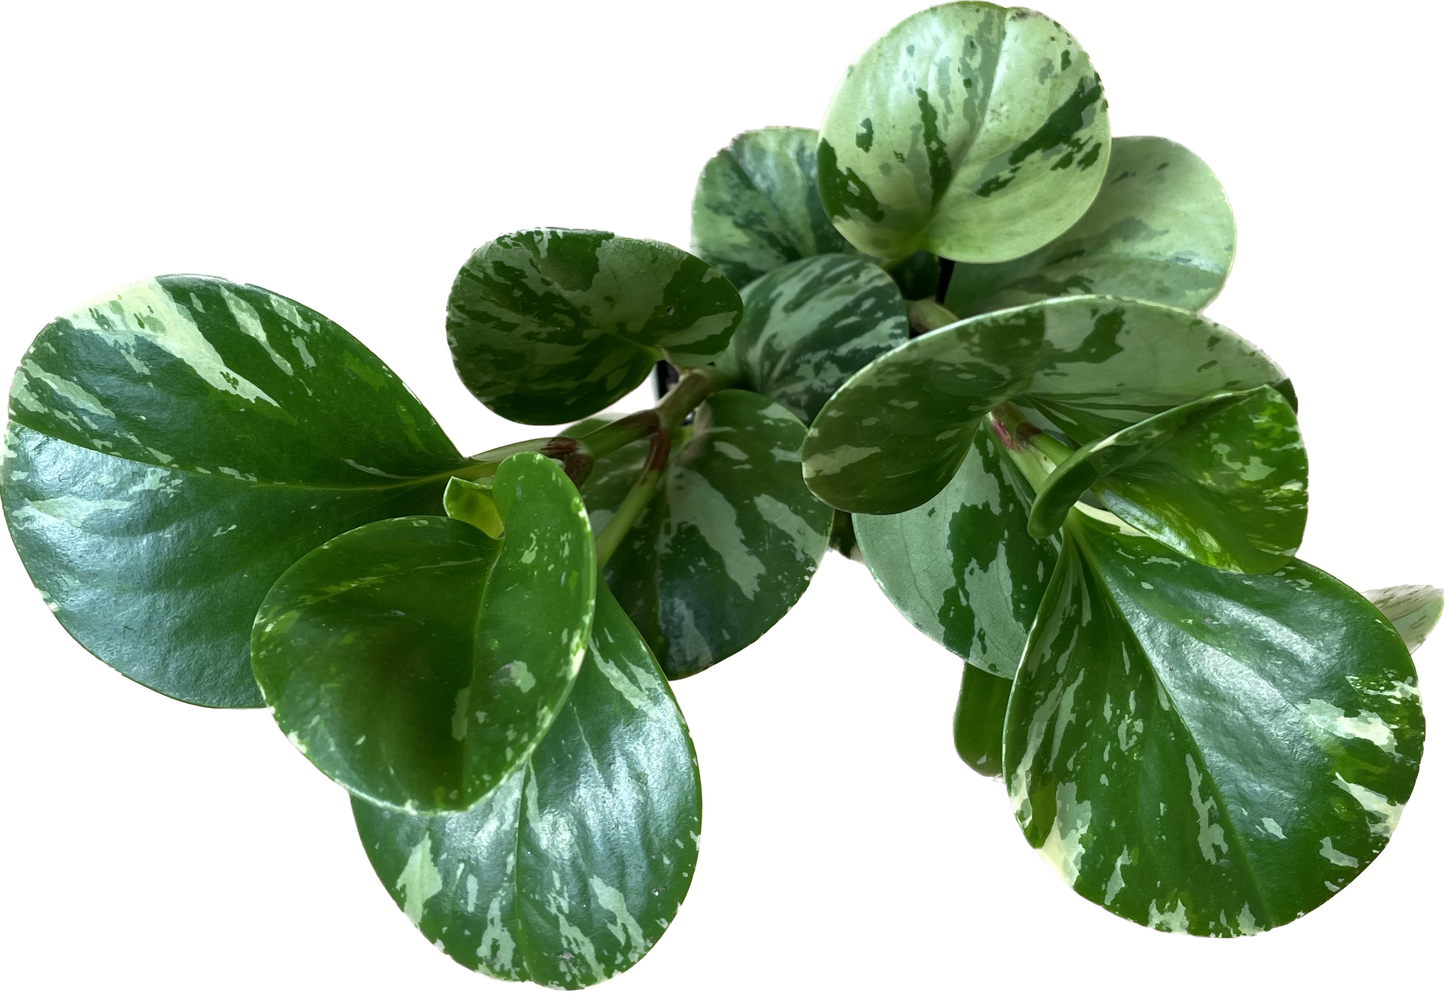 Live Rubber Plant - Peperomia Obtusifolia Variegated - Peperomia 'Marble' Available in 3", 4", and 6" Pots - CA Seller - Ideal Gift for Office, Garden and Home - Peperomia Live Plant